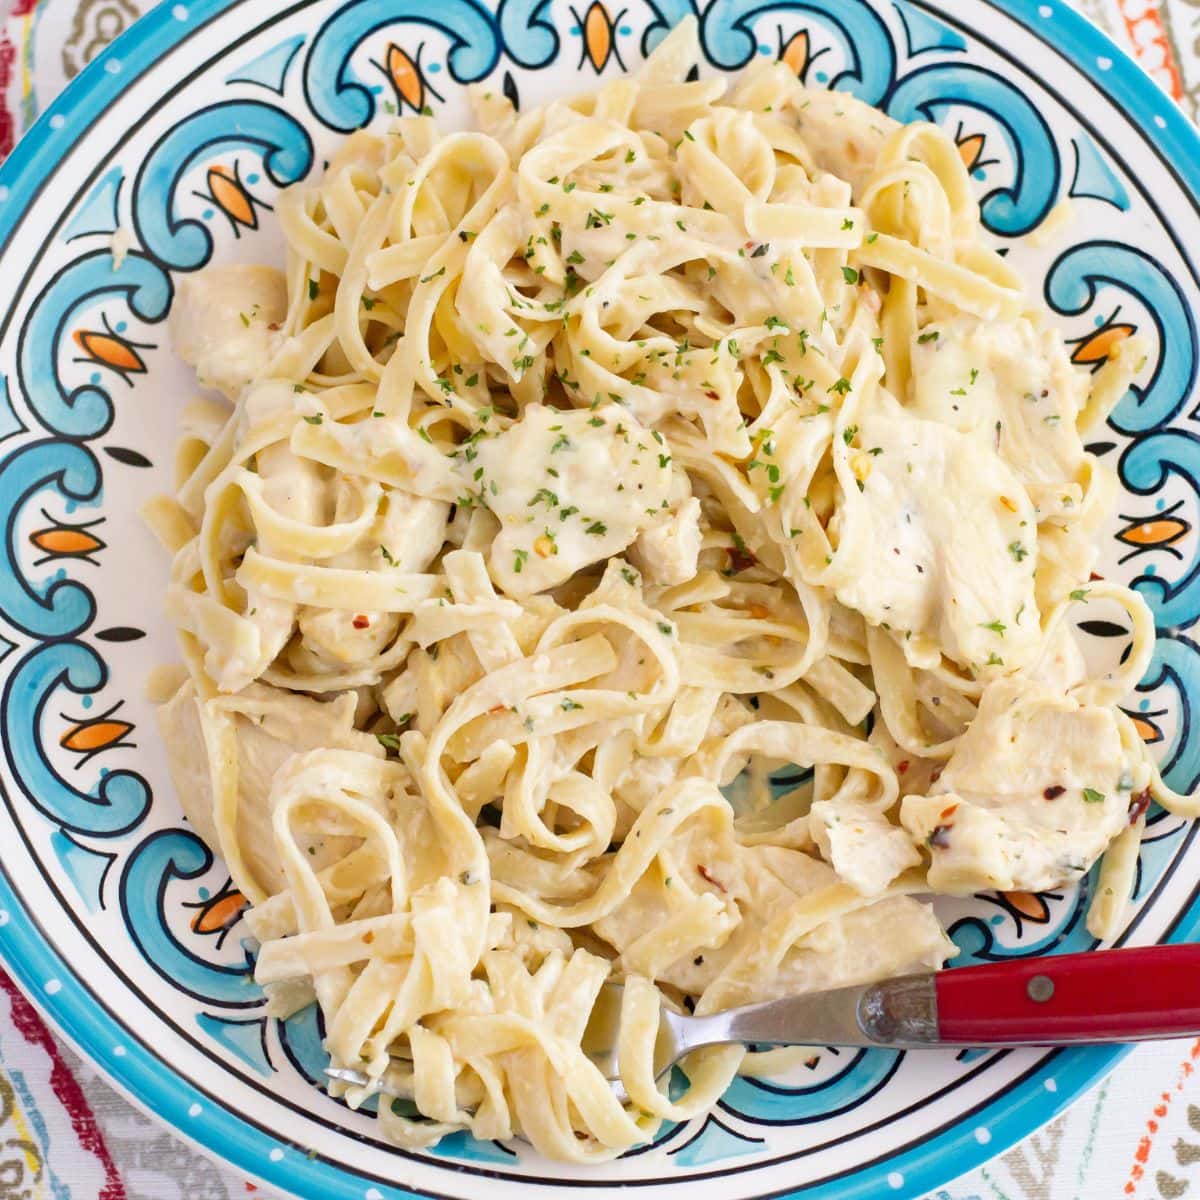 A serving of Spicy Chicken Alfredo on a dinner plate.